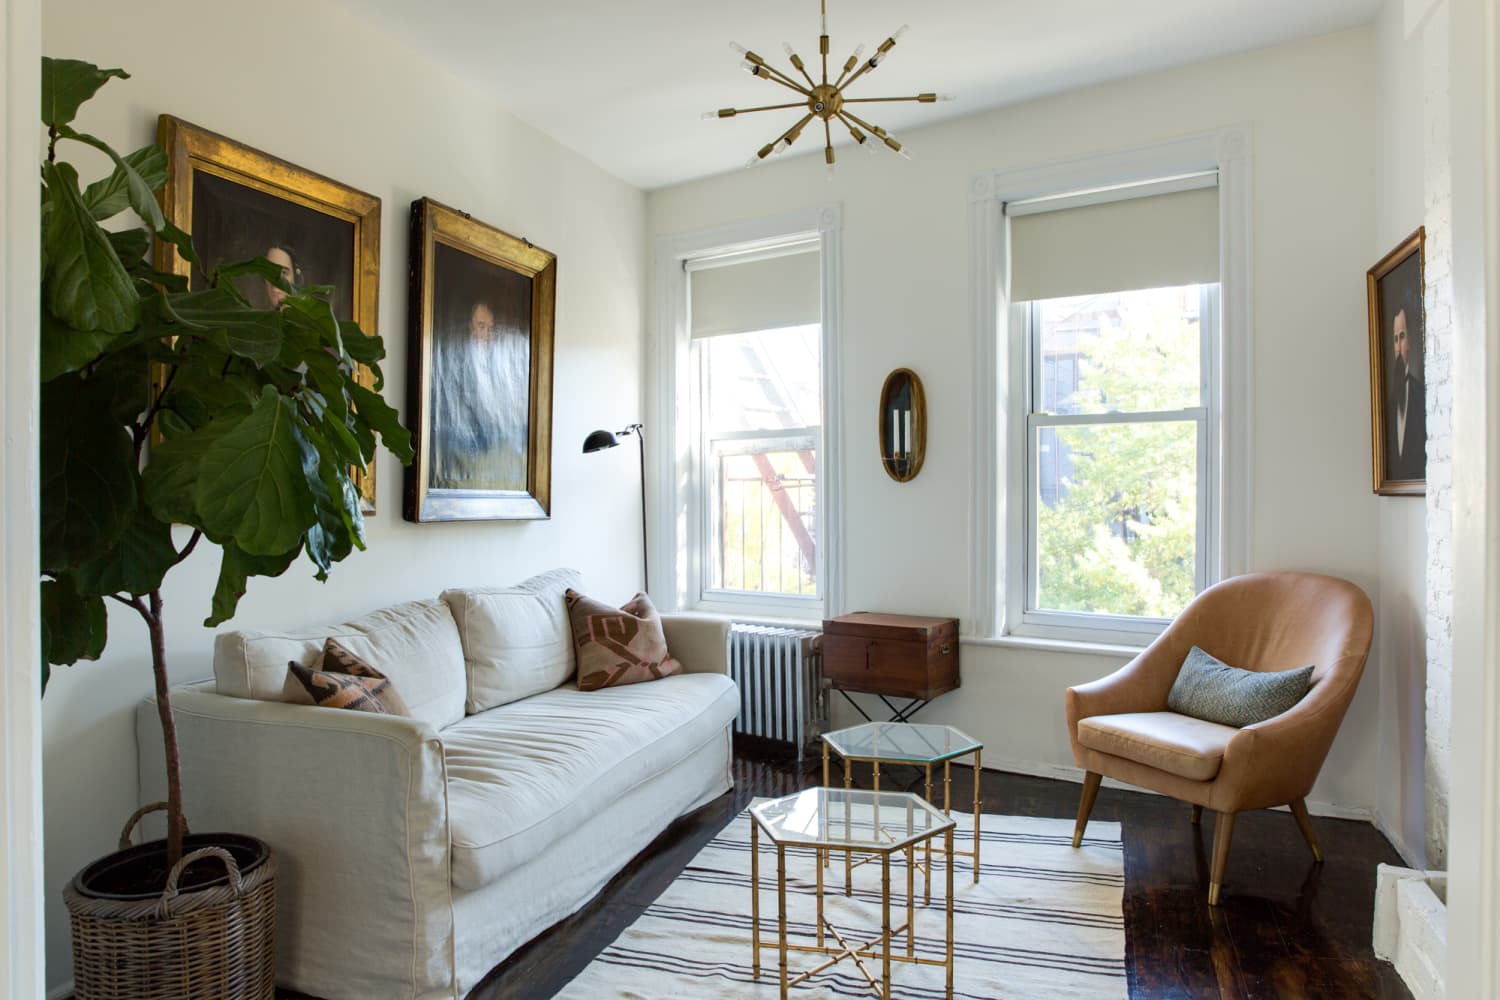 House Tour: NYC Railroad Apartment Design Solutions | Apartment Therapy